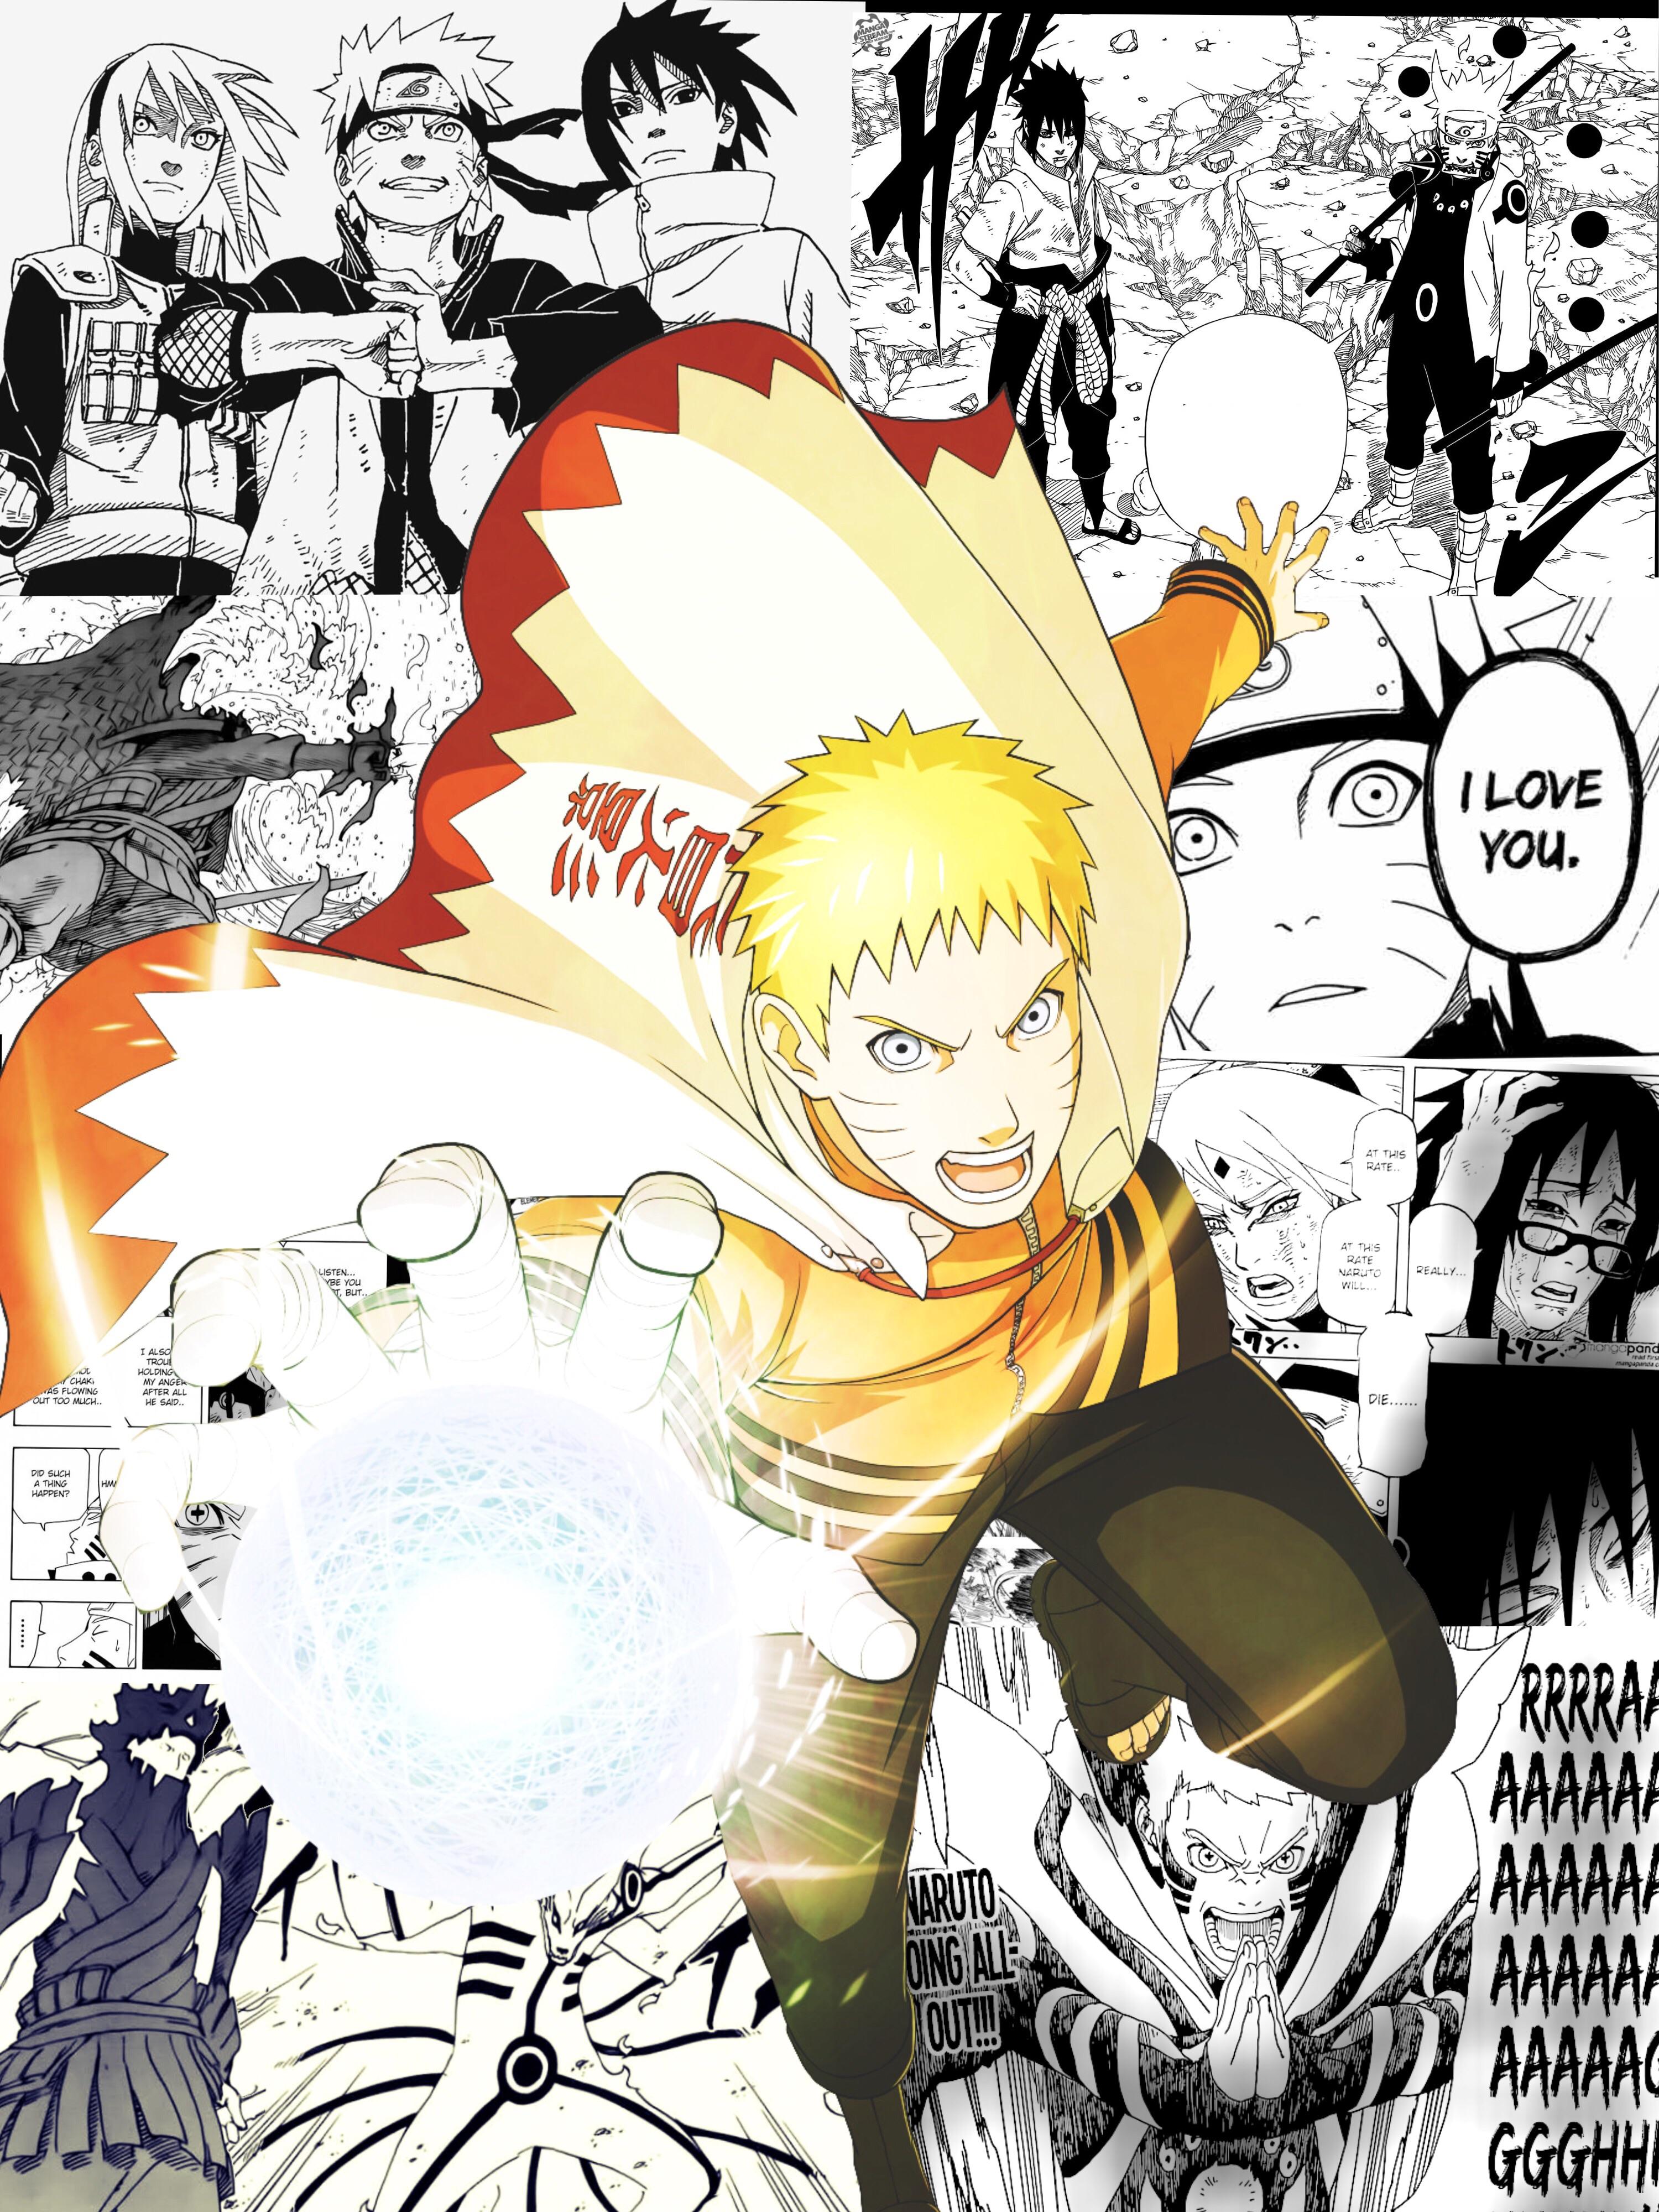 my wallpaper i made for our 7th Hokage